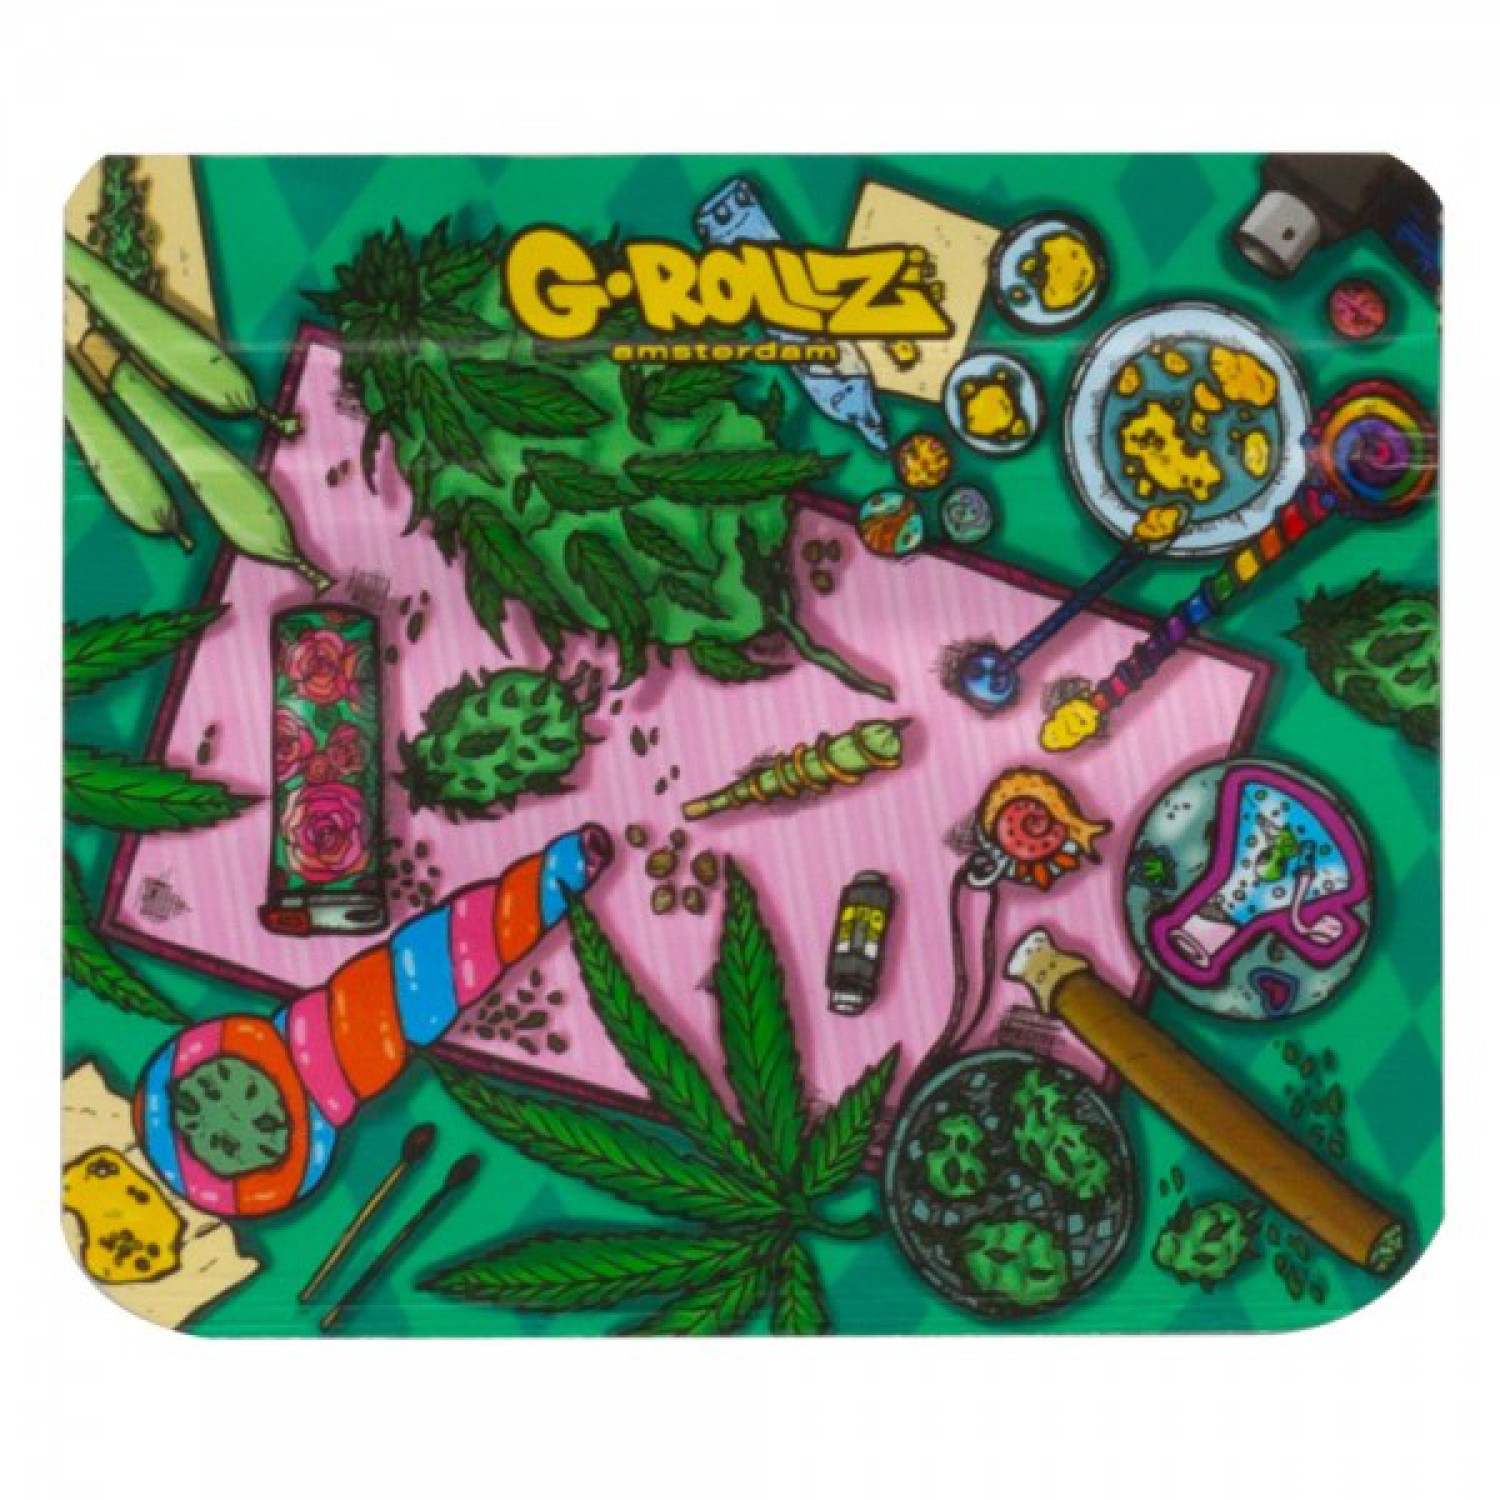 G-Rollz | 'Amsterdam Picnic' 70x60mm Smellproof Bags - 10pcs in Display